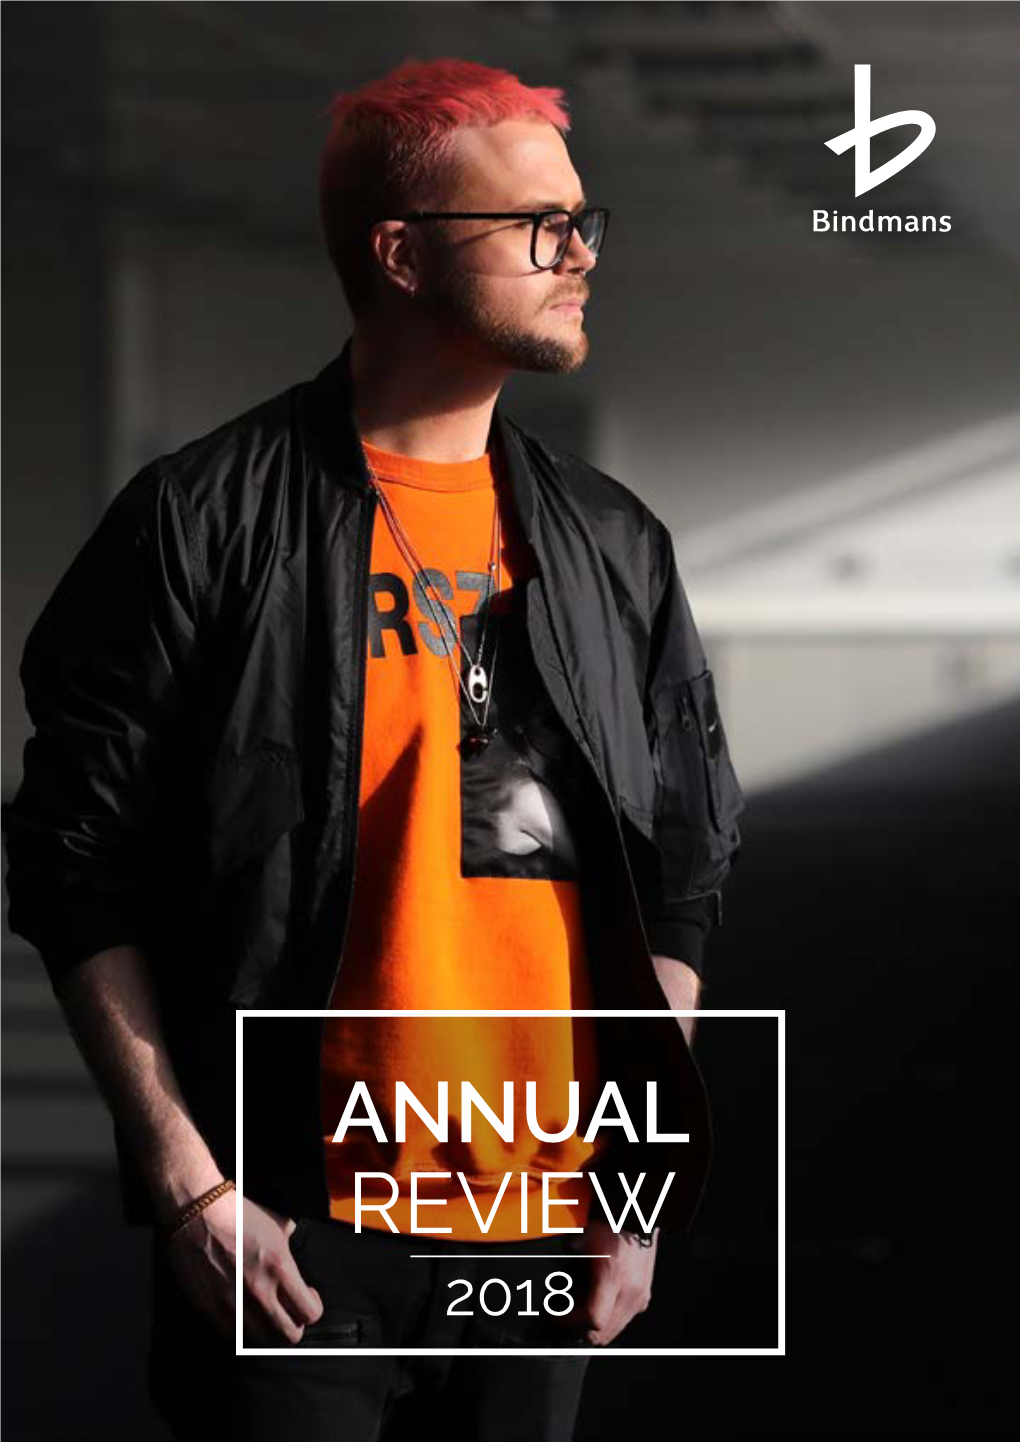 Download Bindmans 2018 Annual Review Here